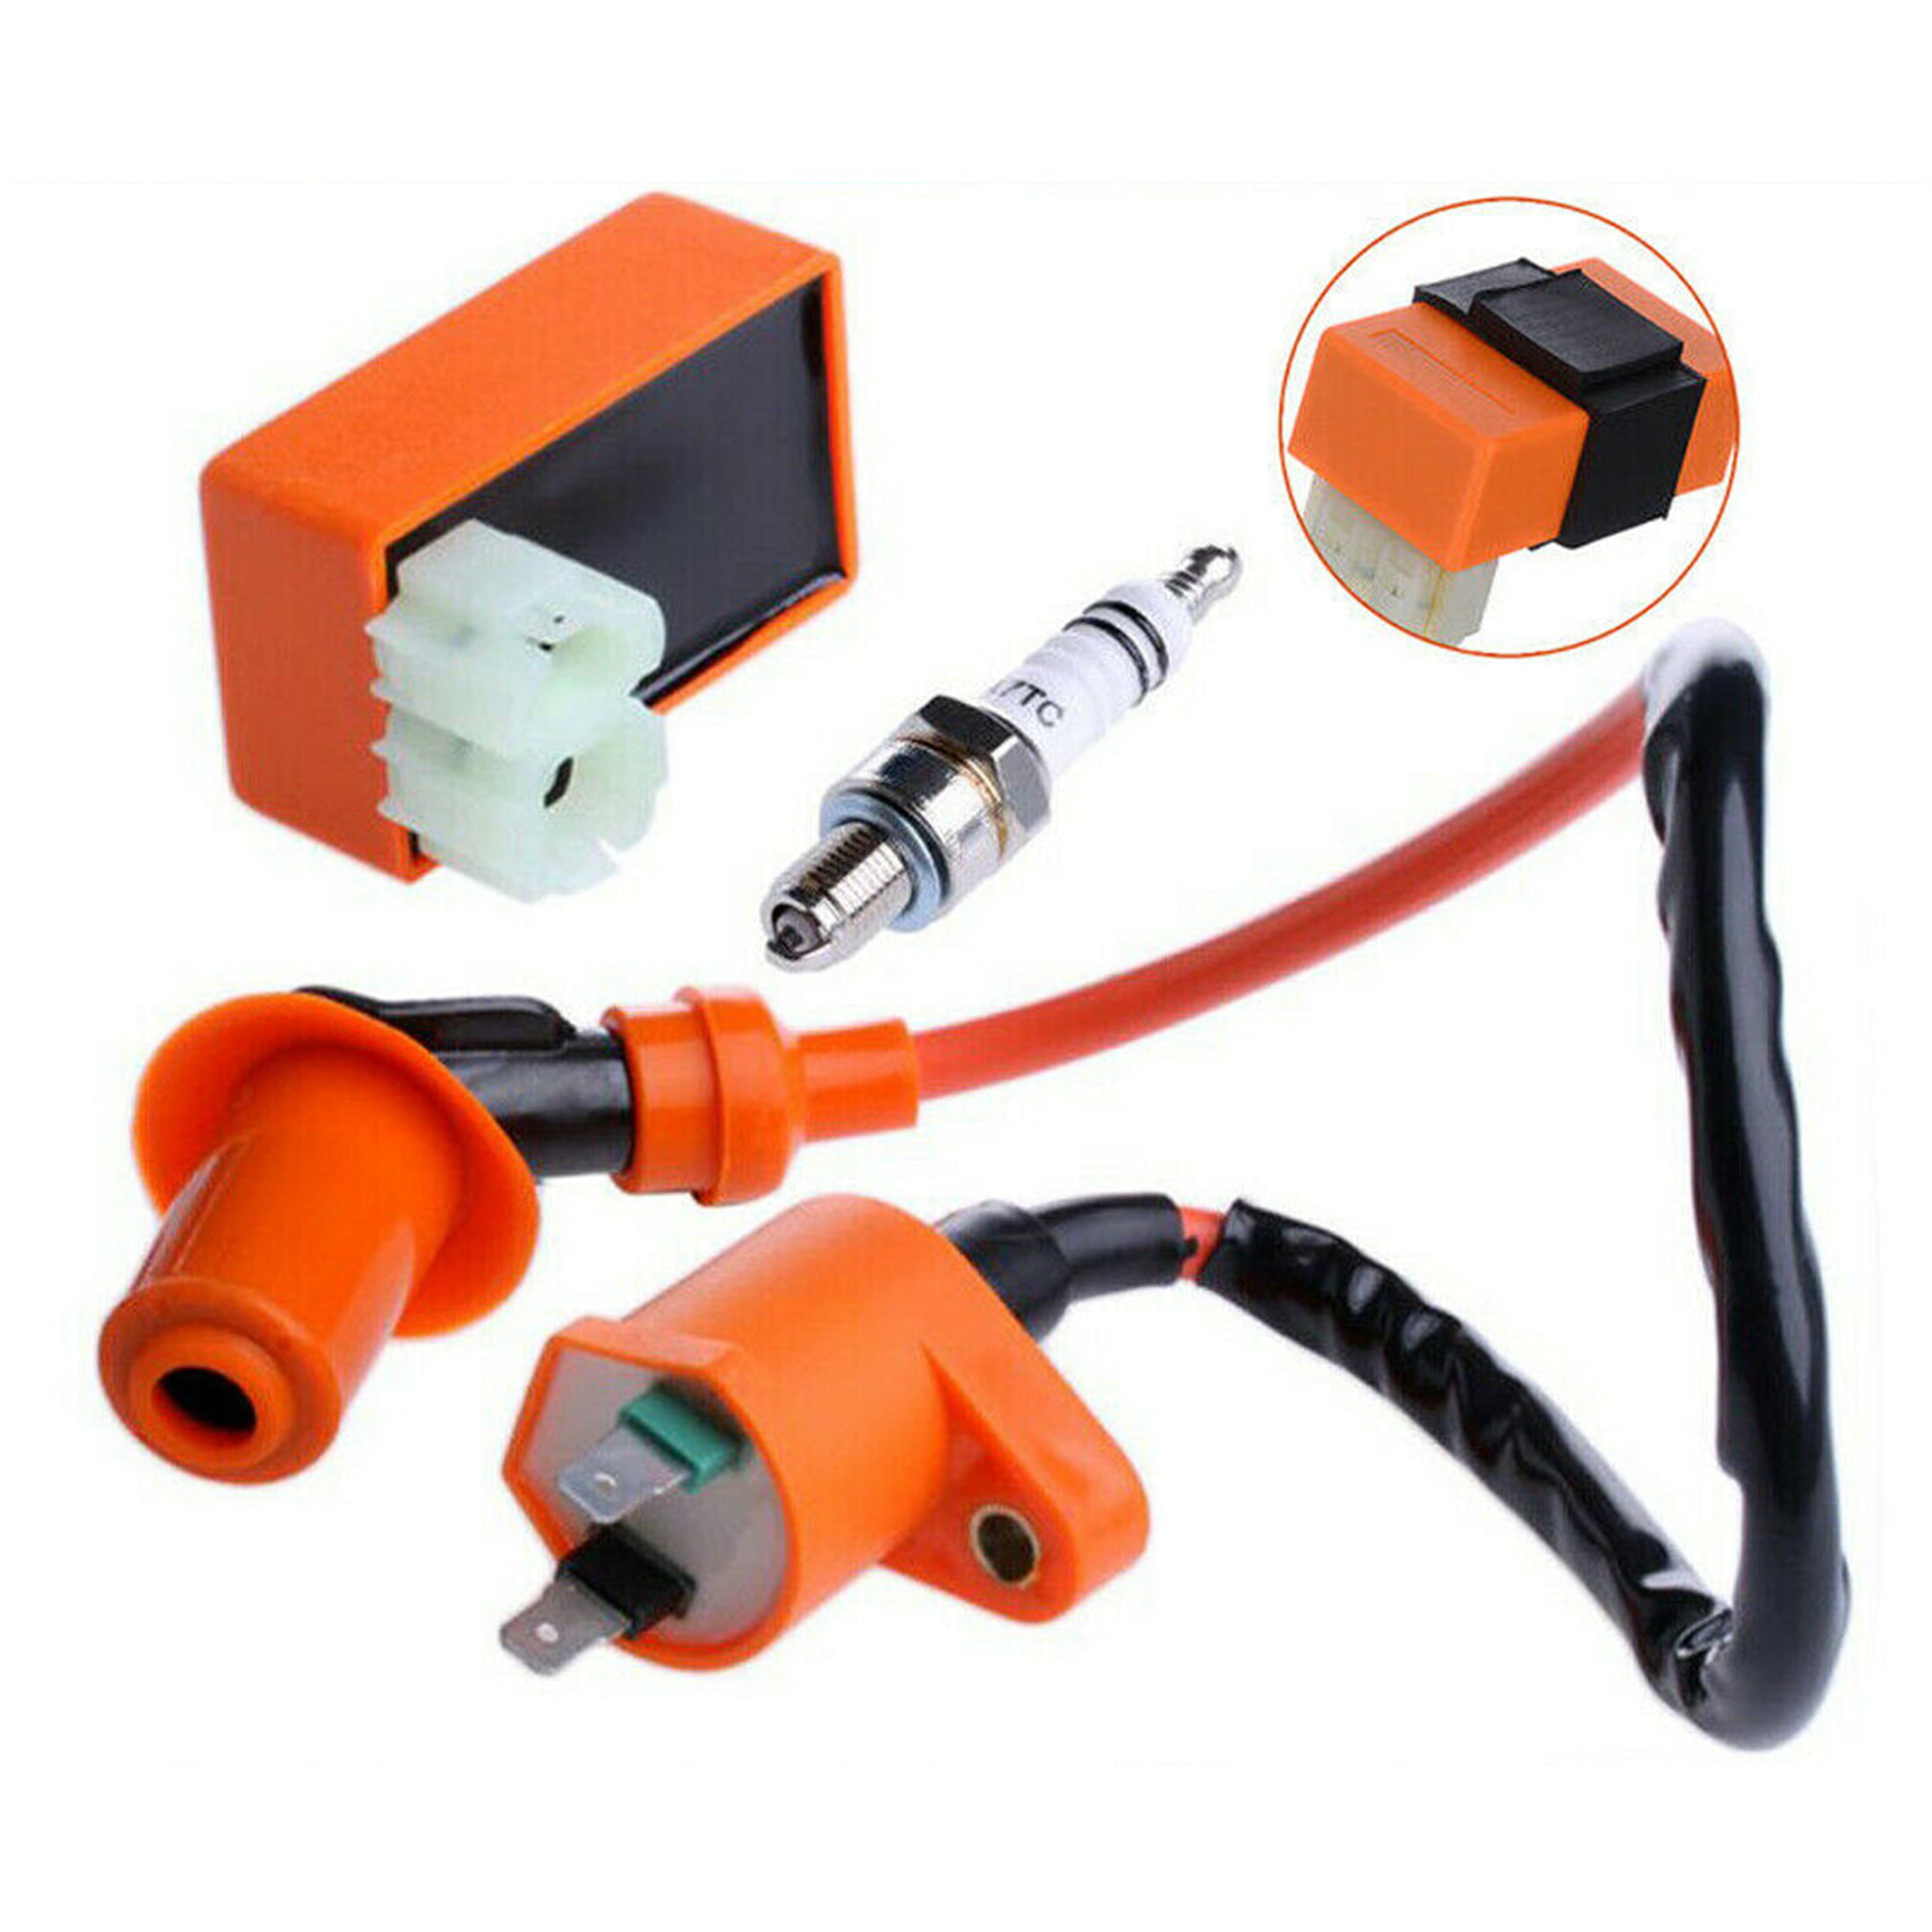 For Gy6 Motorcycle Scooter ATV 50cc 125cc 150cc Ignition Coil CDI Spark Plug Kit